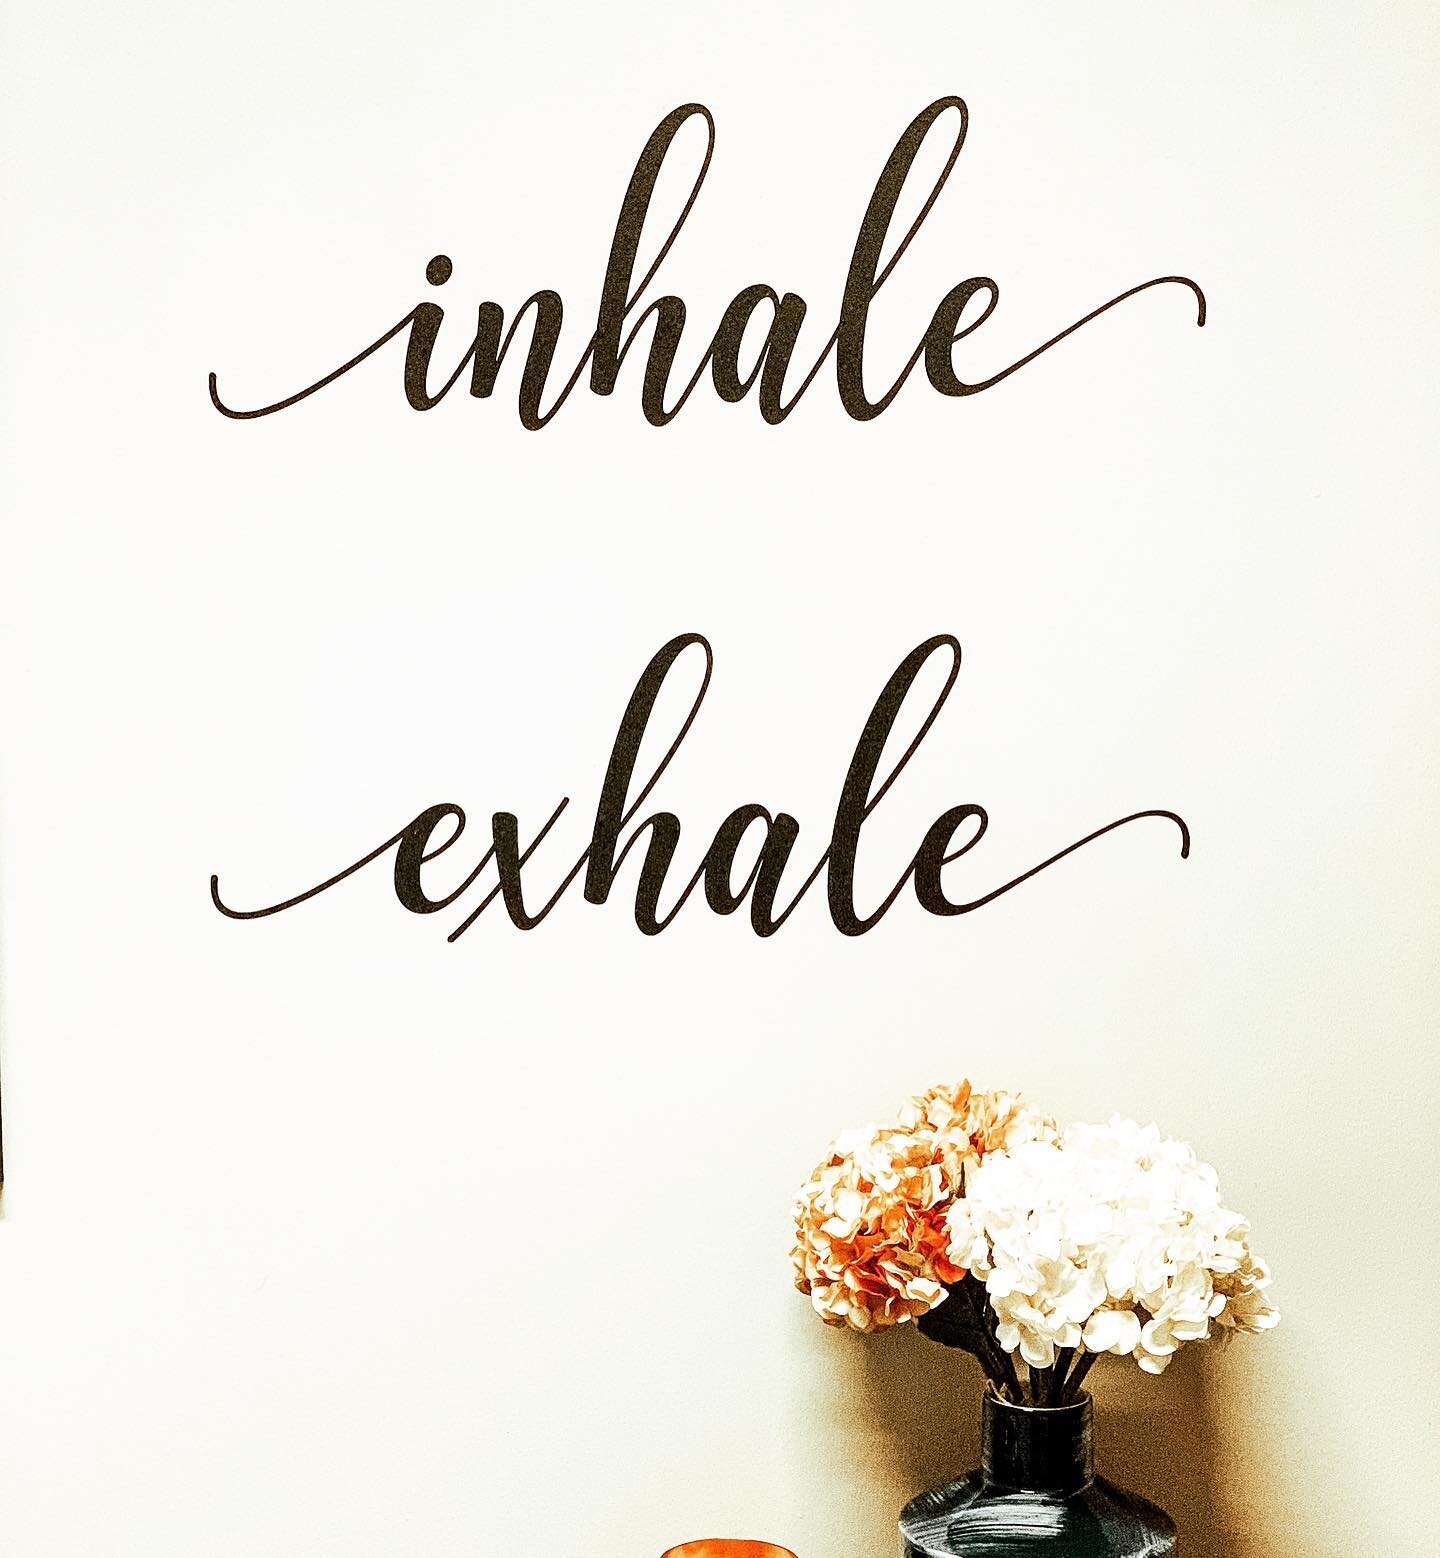 When you&rsquo;re feeling stressed and overwhelmed, taking a moment to slow things down with a few intentional + slow deep breaths can help you find a pause, quiet your thoughts + calm your nervous system. 

Here&rsquo;s a simple breathing exercise t